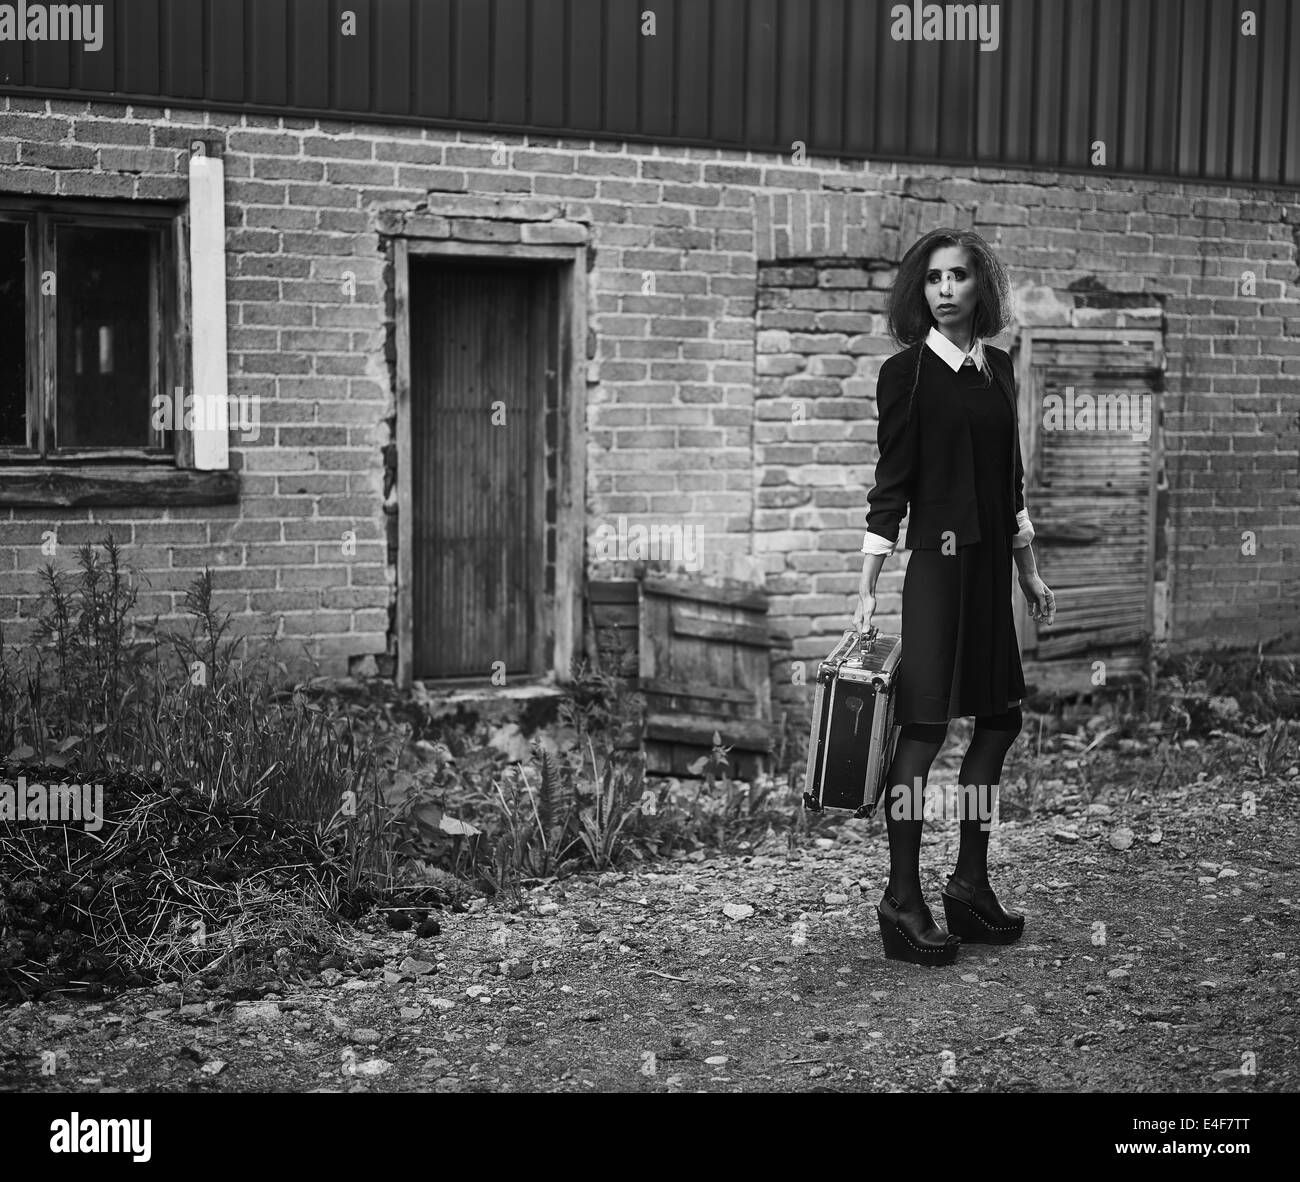 Fashionable young woman with her suitcase, old rural scene, black and white image Stock Photo